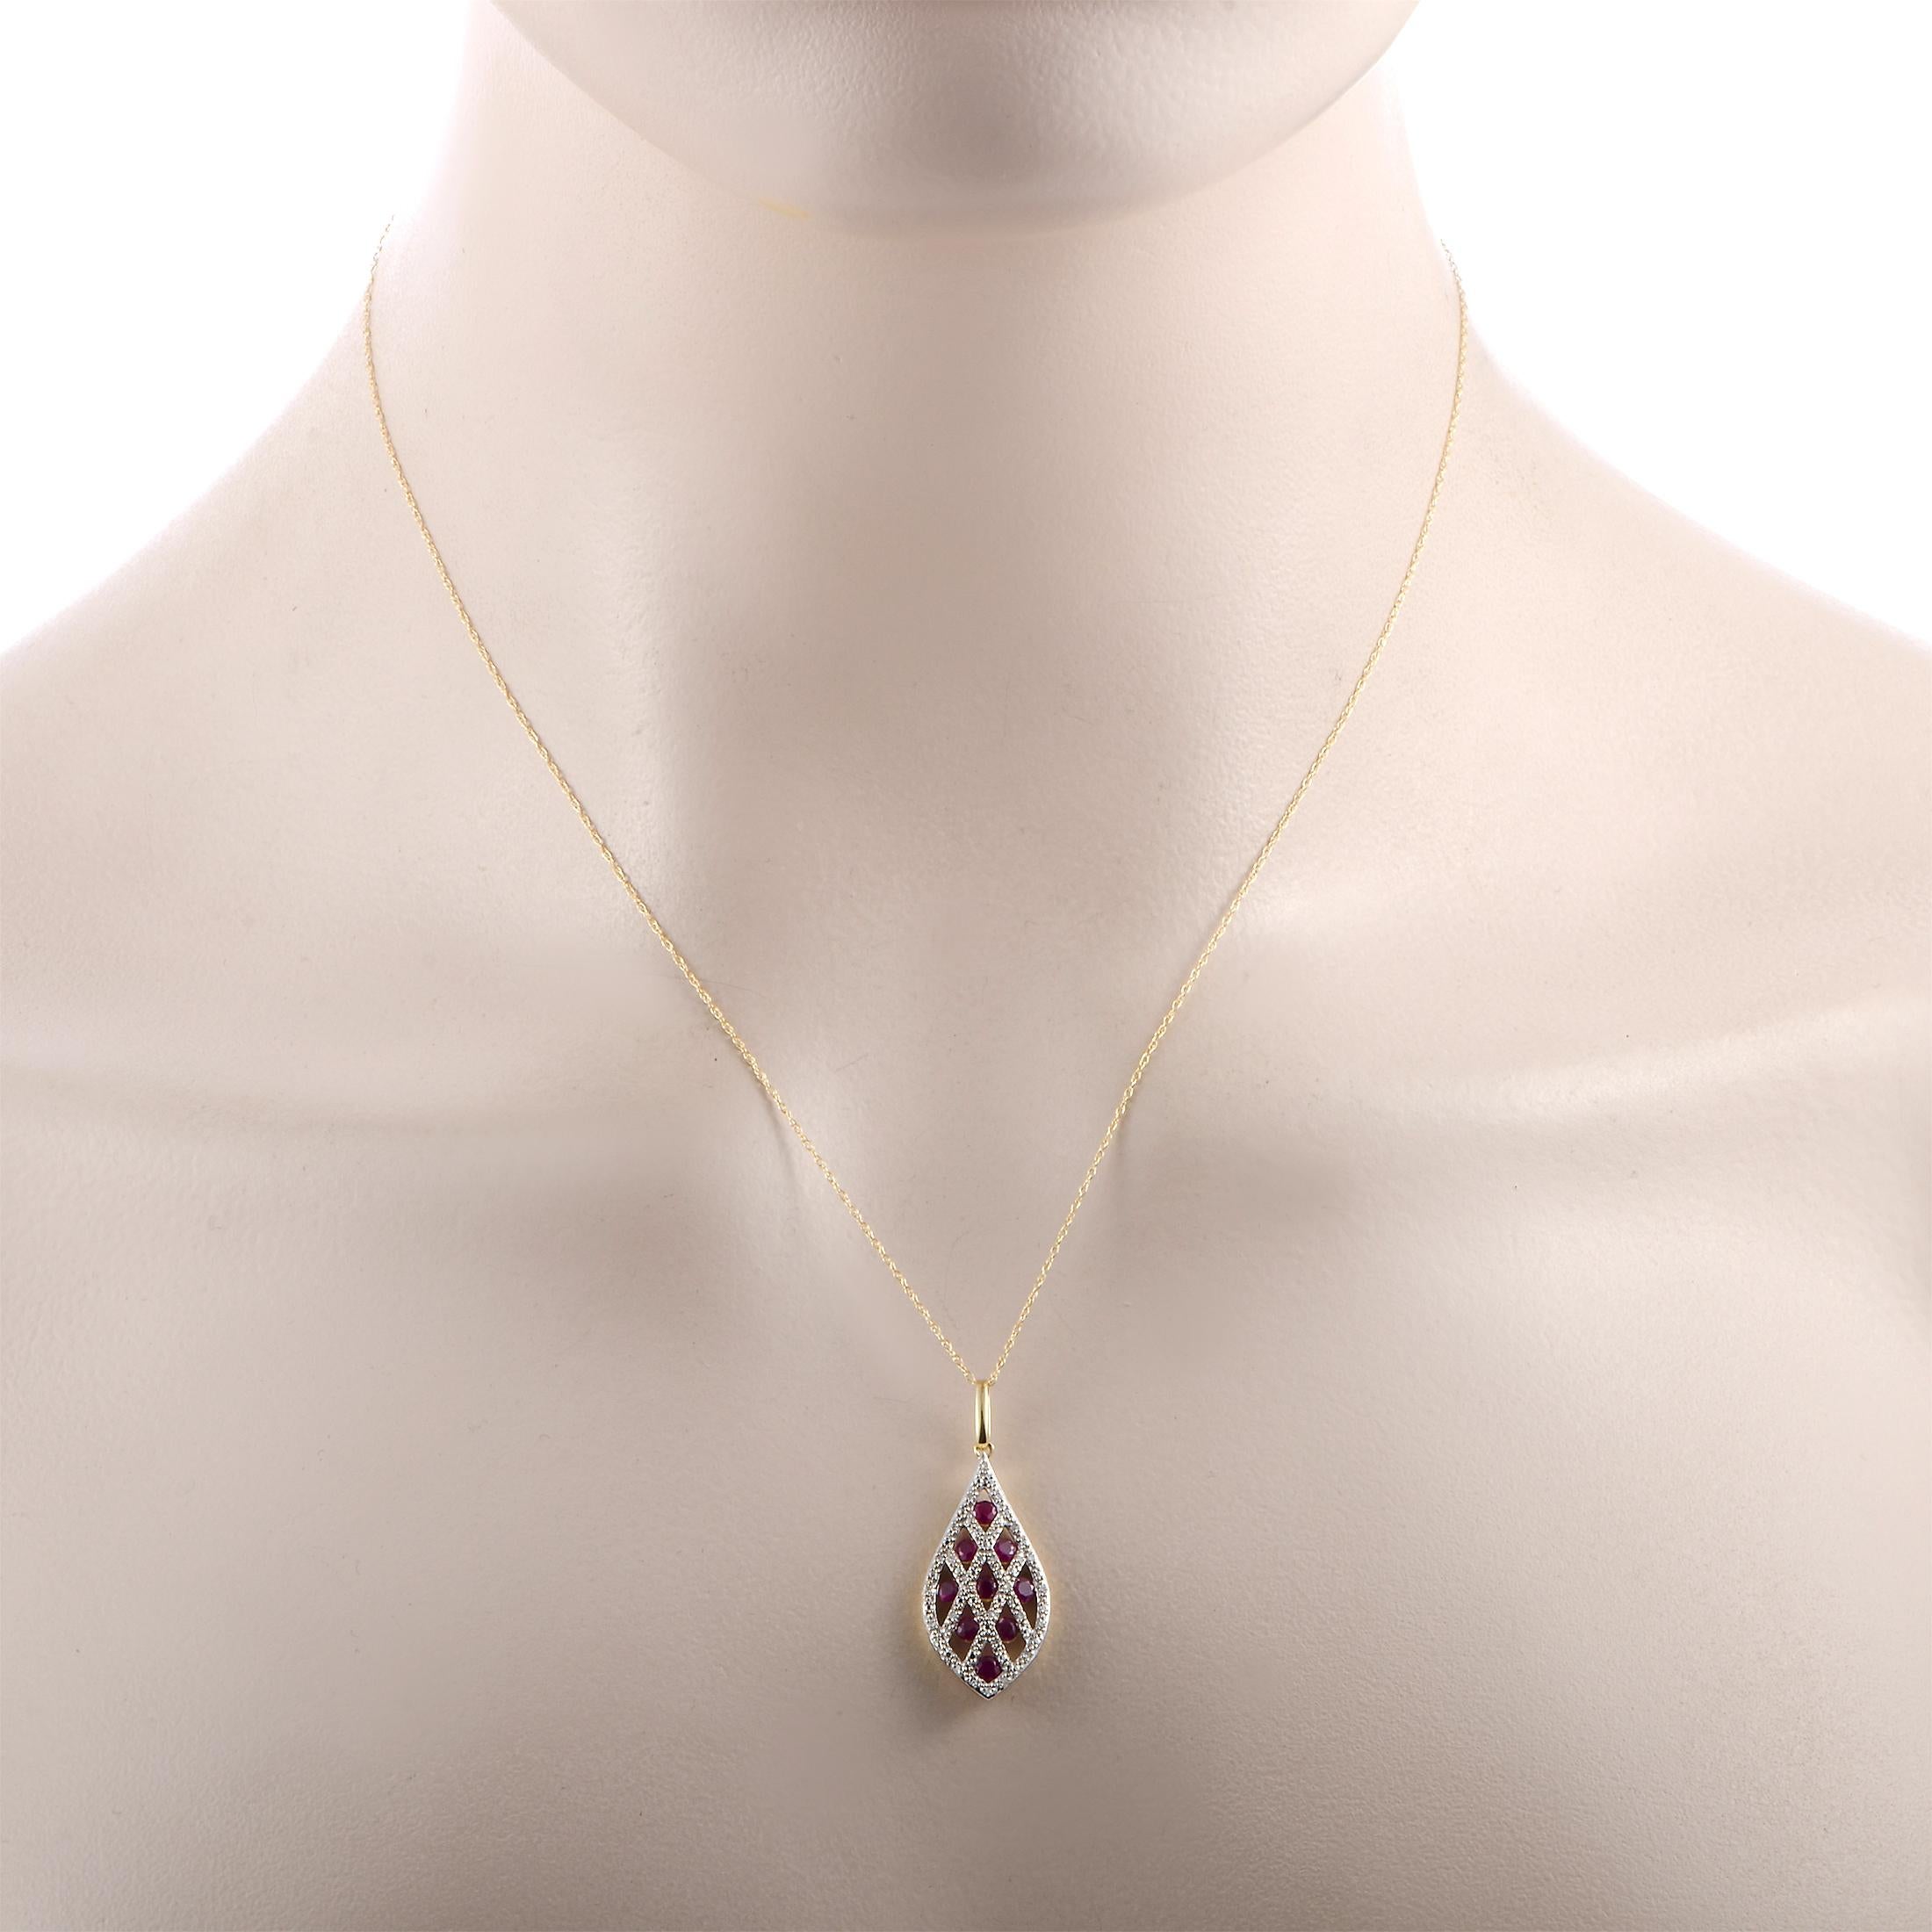 This LB Exclusive necklace is made of 14K yellow gold and boasts an 18” chain and a pendant that measures 1.25” in length and 0.50” in width. The necklace weighs 2.9 grams. It is set with rubies and a total of 0.13 carats of diamonds.

Offered in